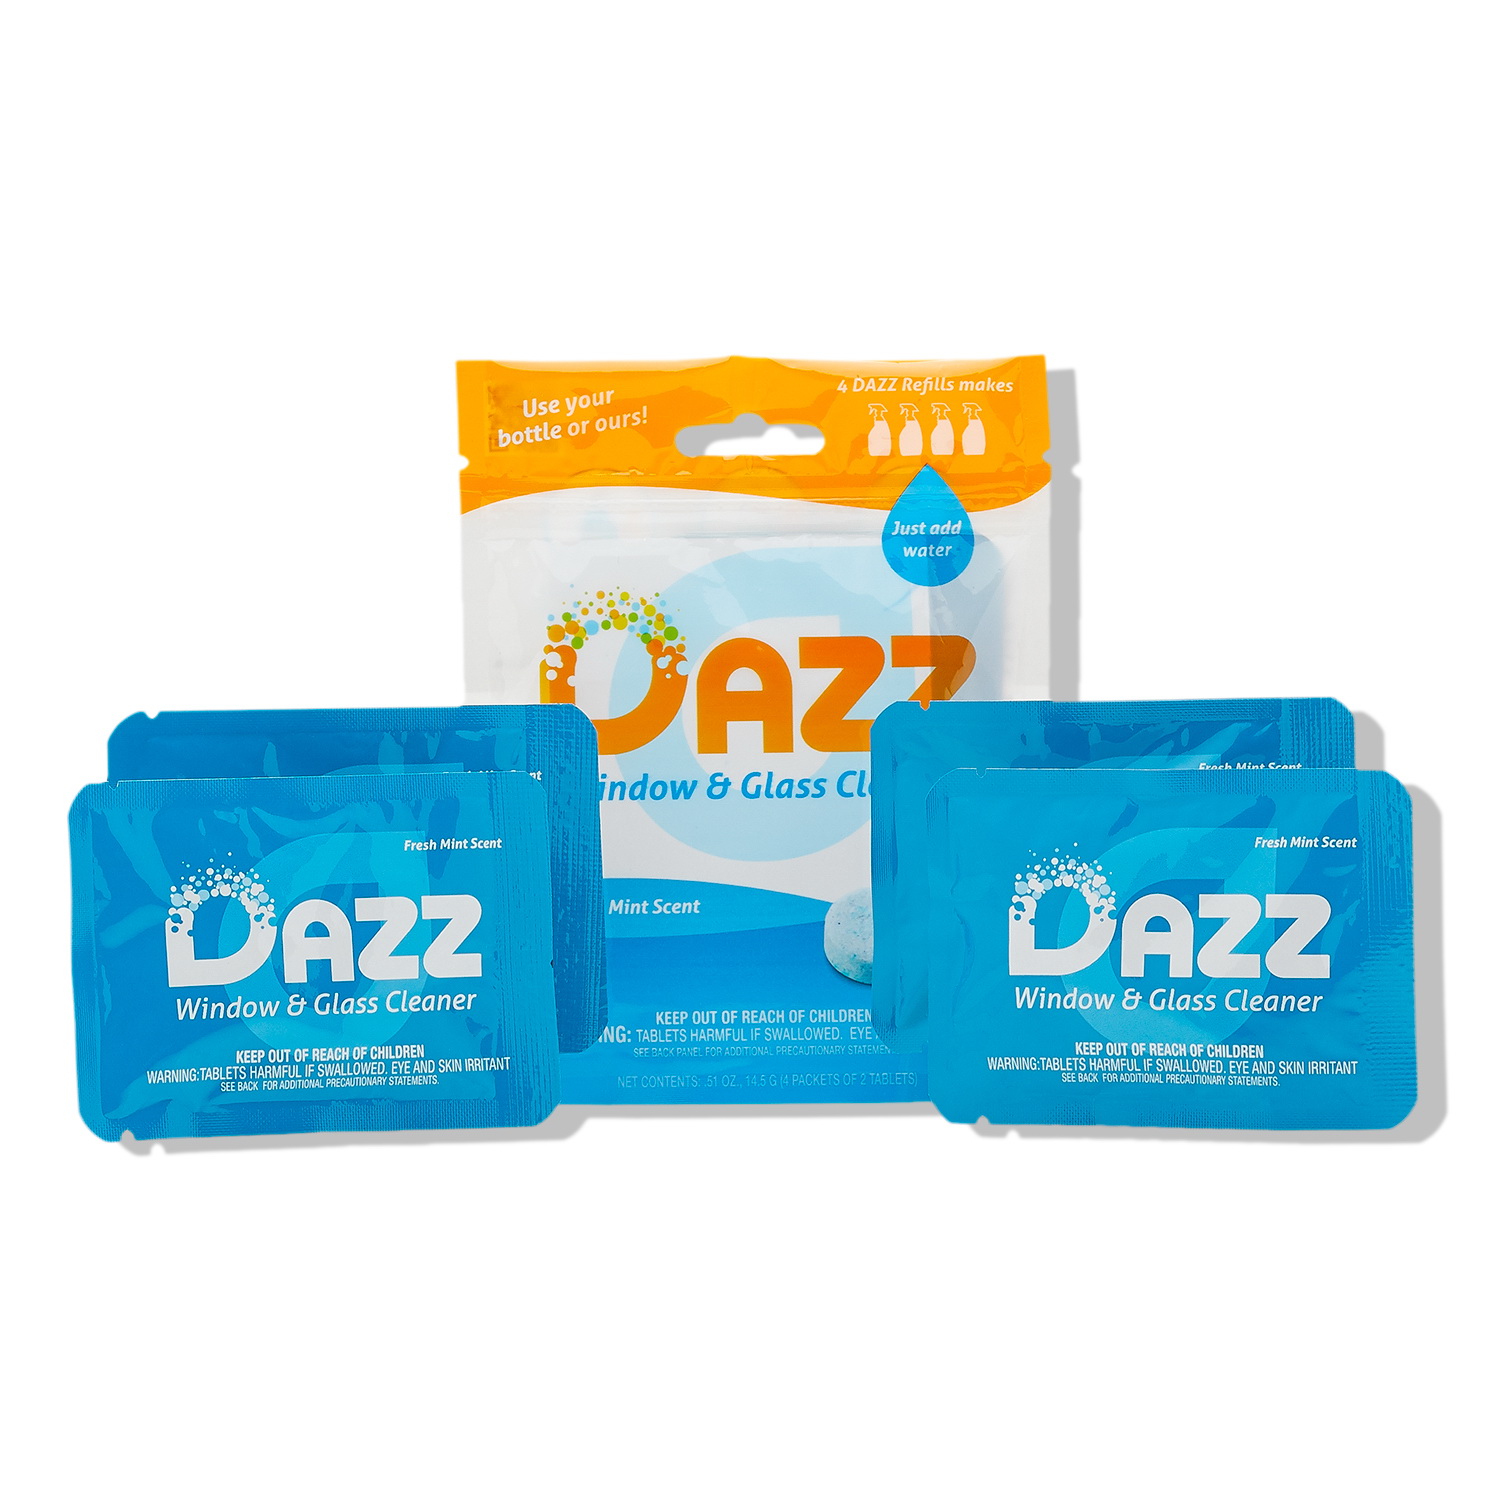 Dazz 1 Window and Glass Cleaning Tablet - 1